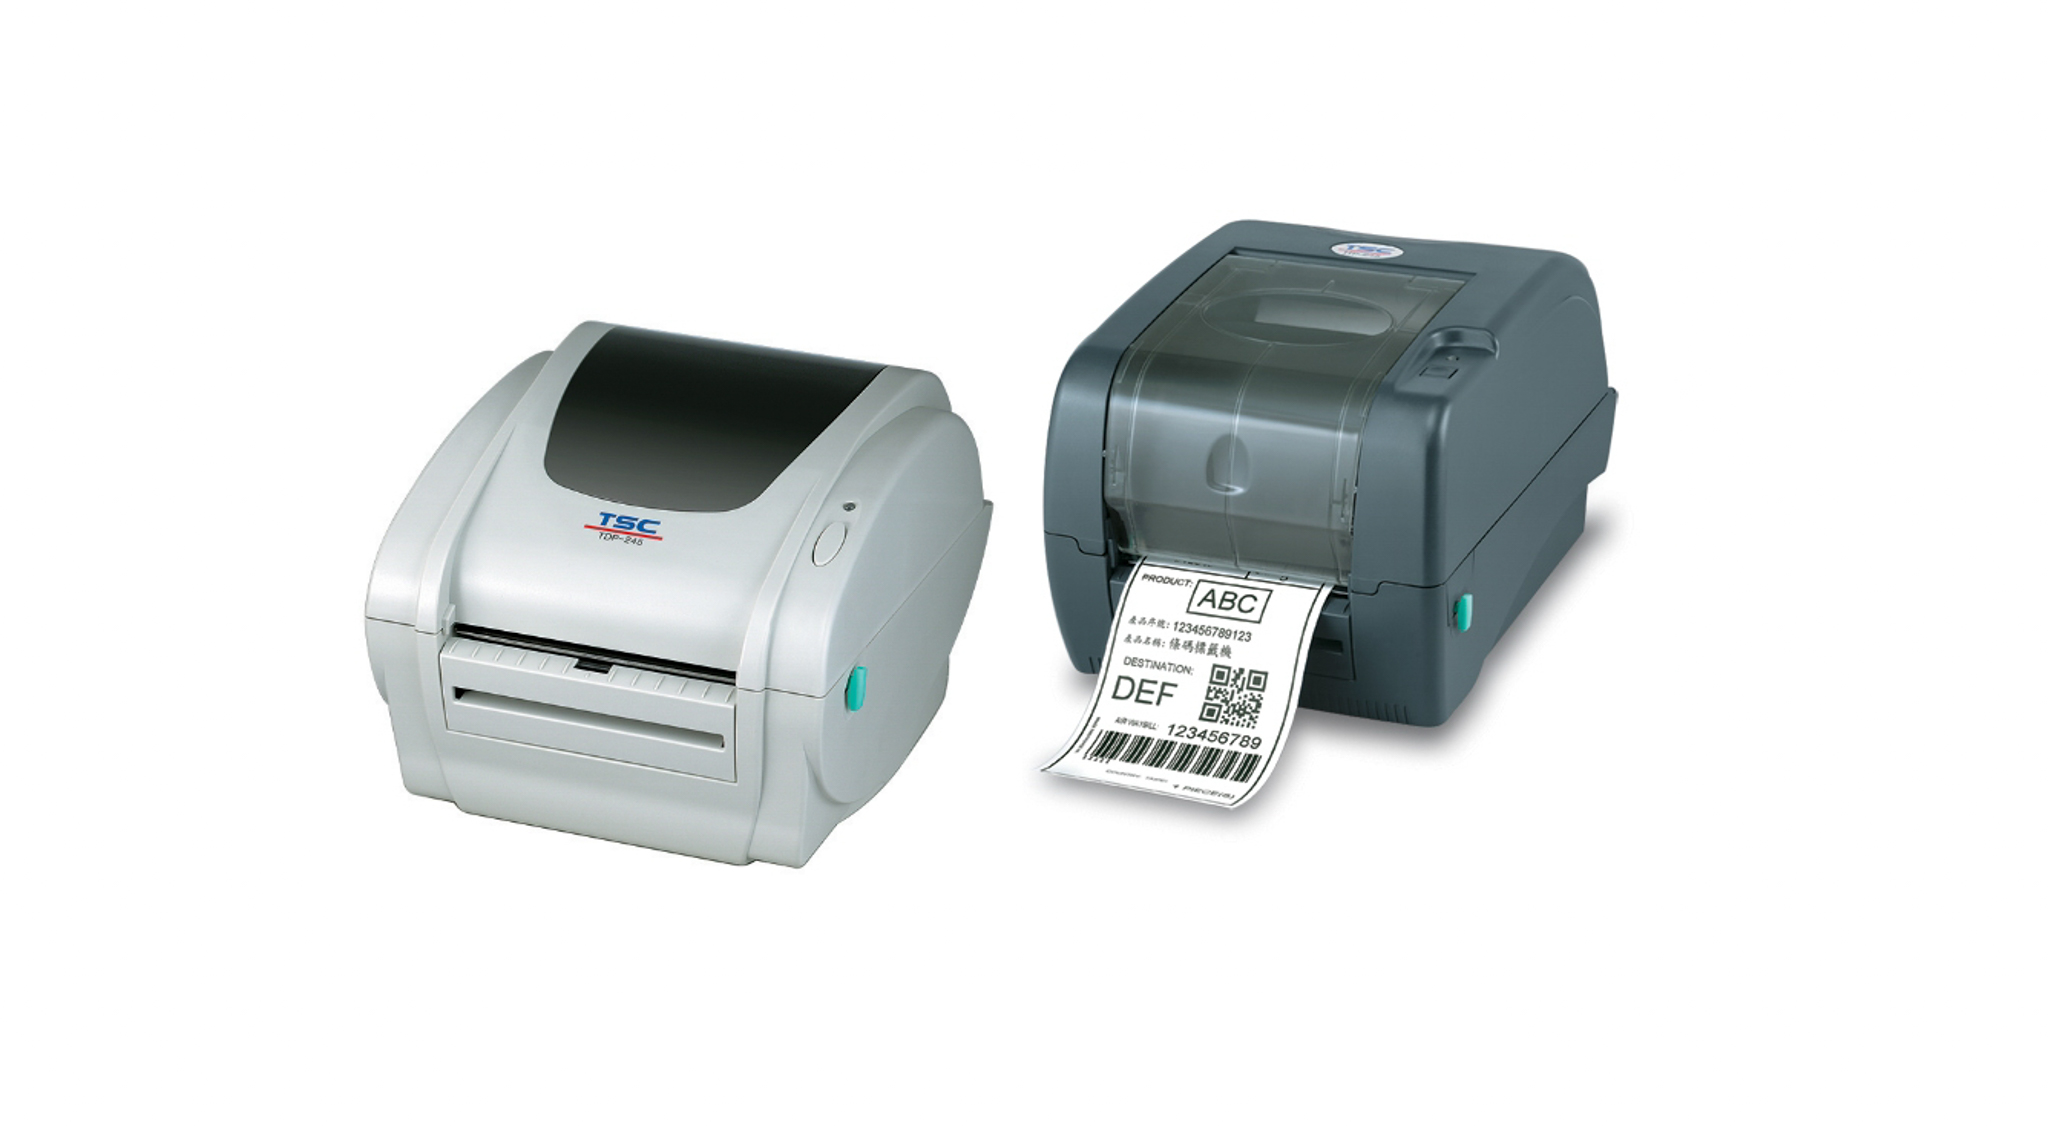 Two grey digital weighing scale printers on a white background